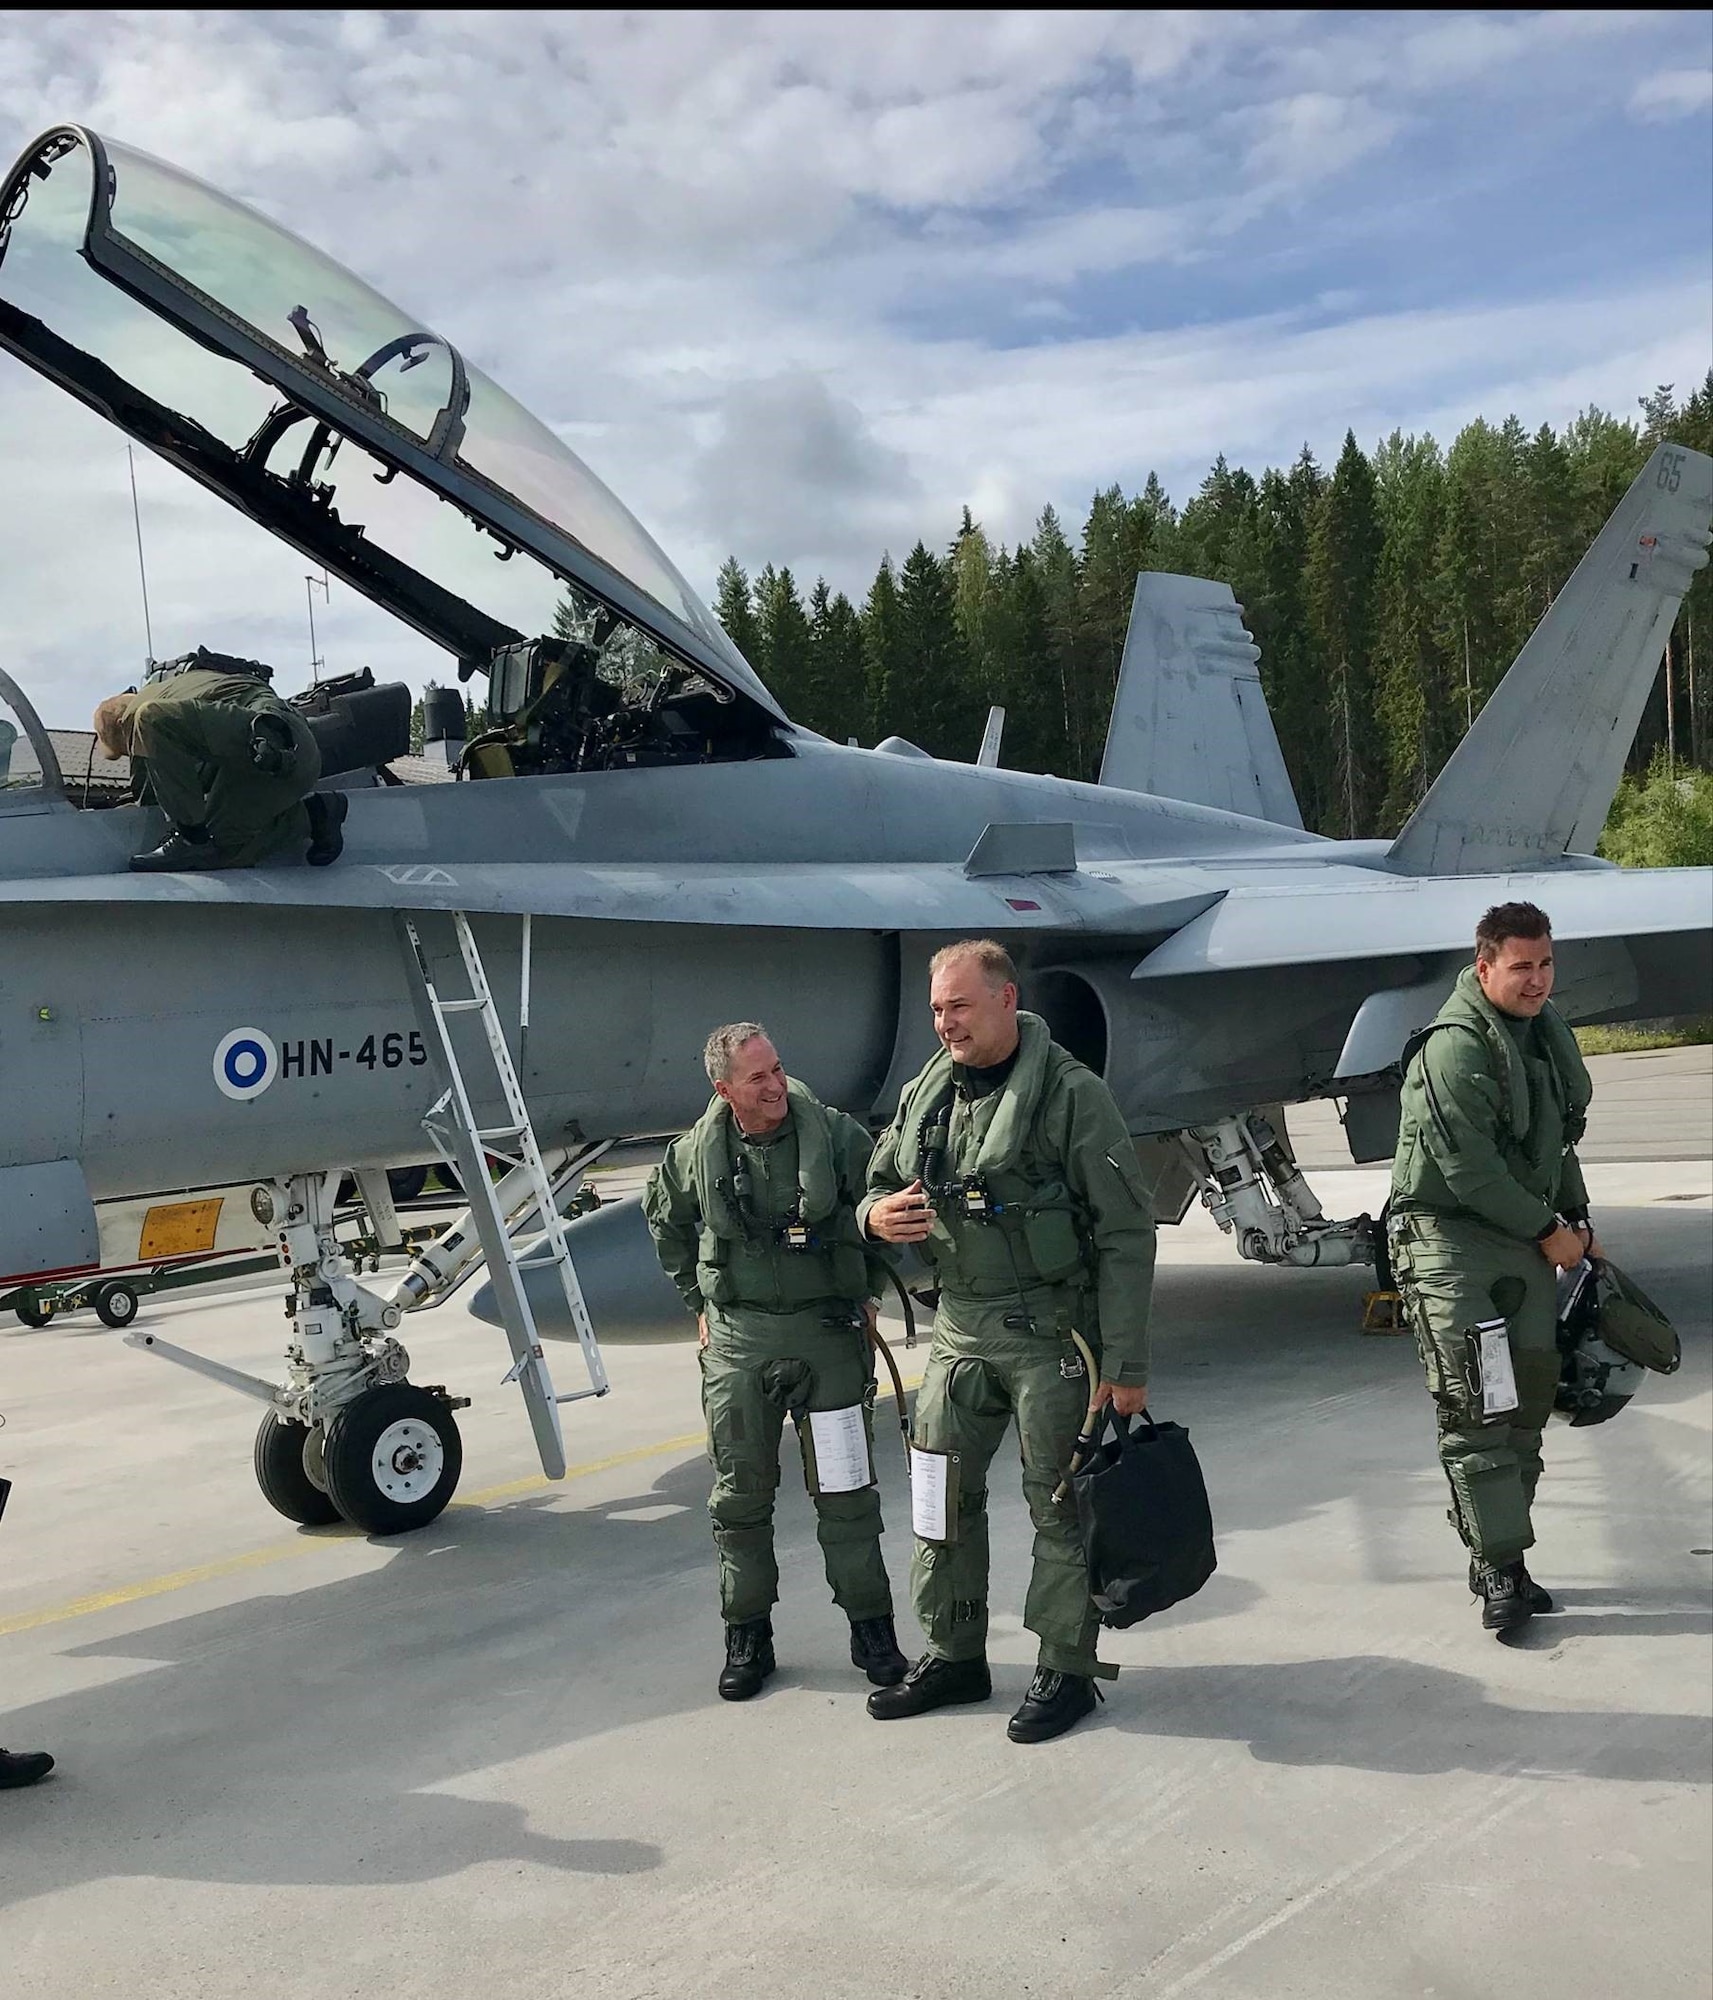 U.S. Air Force Chief of Staff Gen. David L. Goldfein discusses a just-completed training flight July 15 with Finnish Air Chief Maj. Gen. Pasi Jokinen. Goldfein was part of an F-18 training flight that allowed him to see firsthand Finland’s capabilities. Afterward Goldfein said he was impressed. (Courtesy photo)